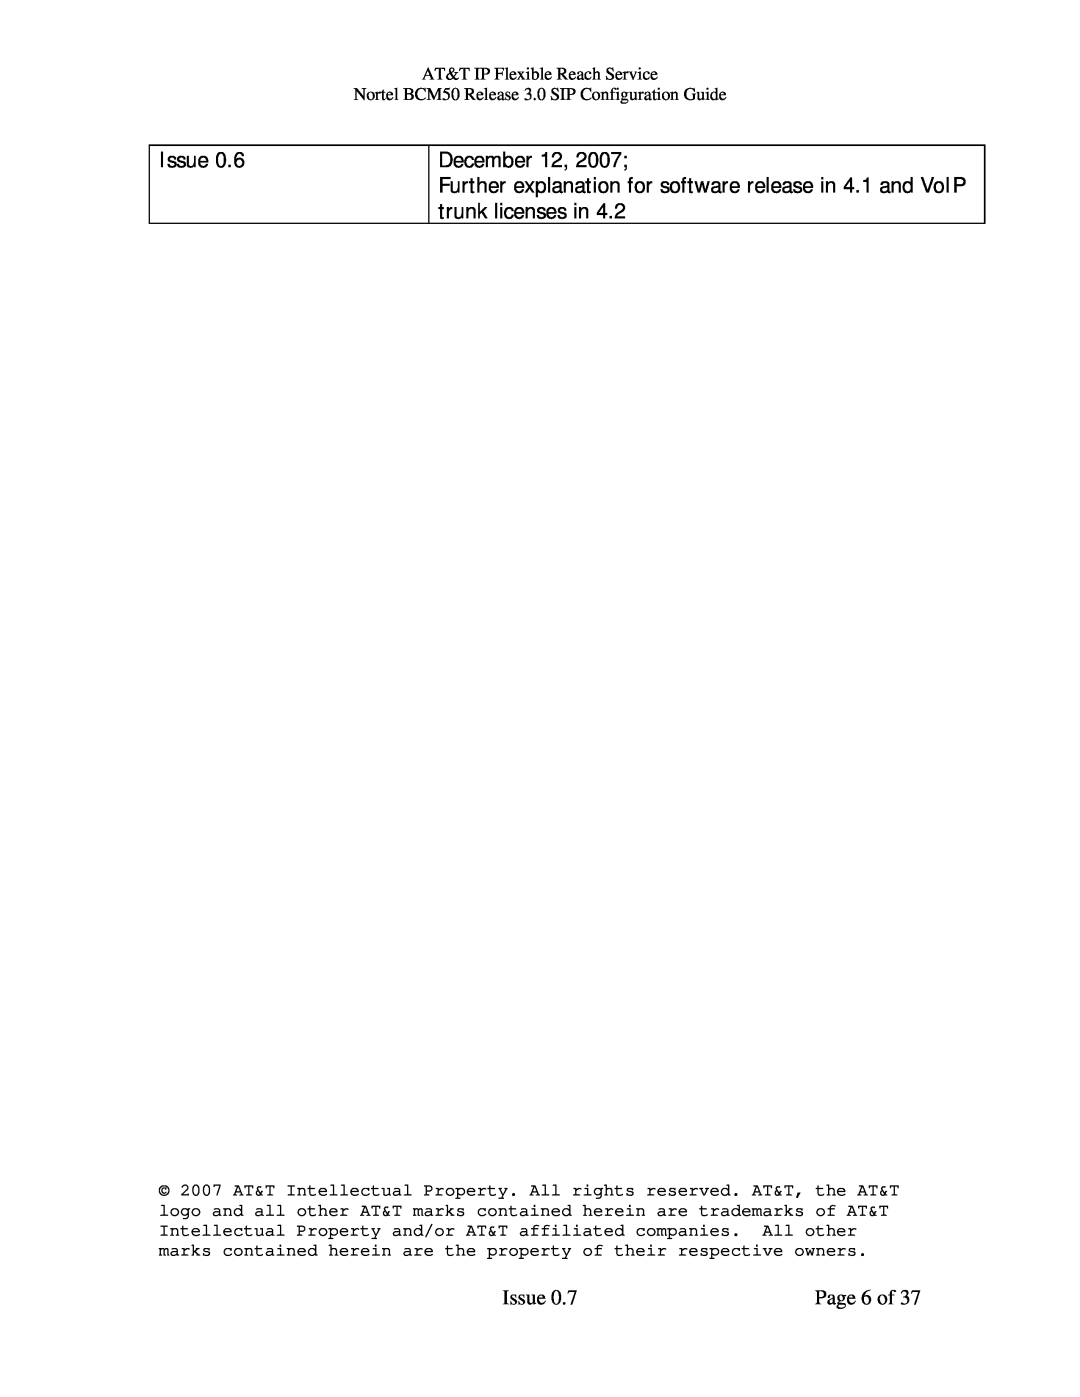 AT&T BCM50 manual Issue, December 12, Page 6 of 